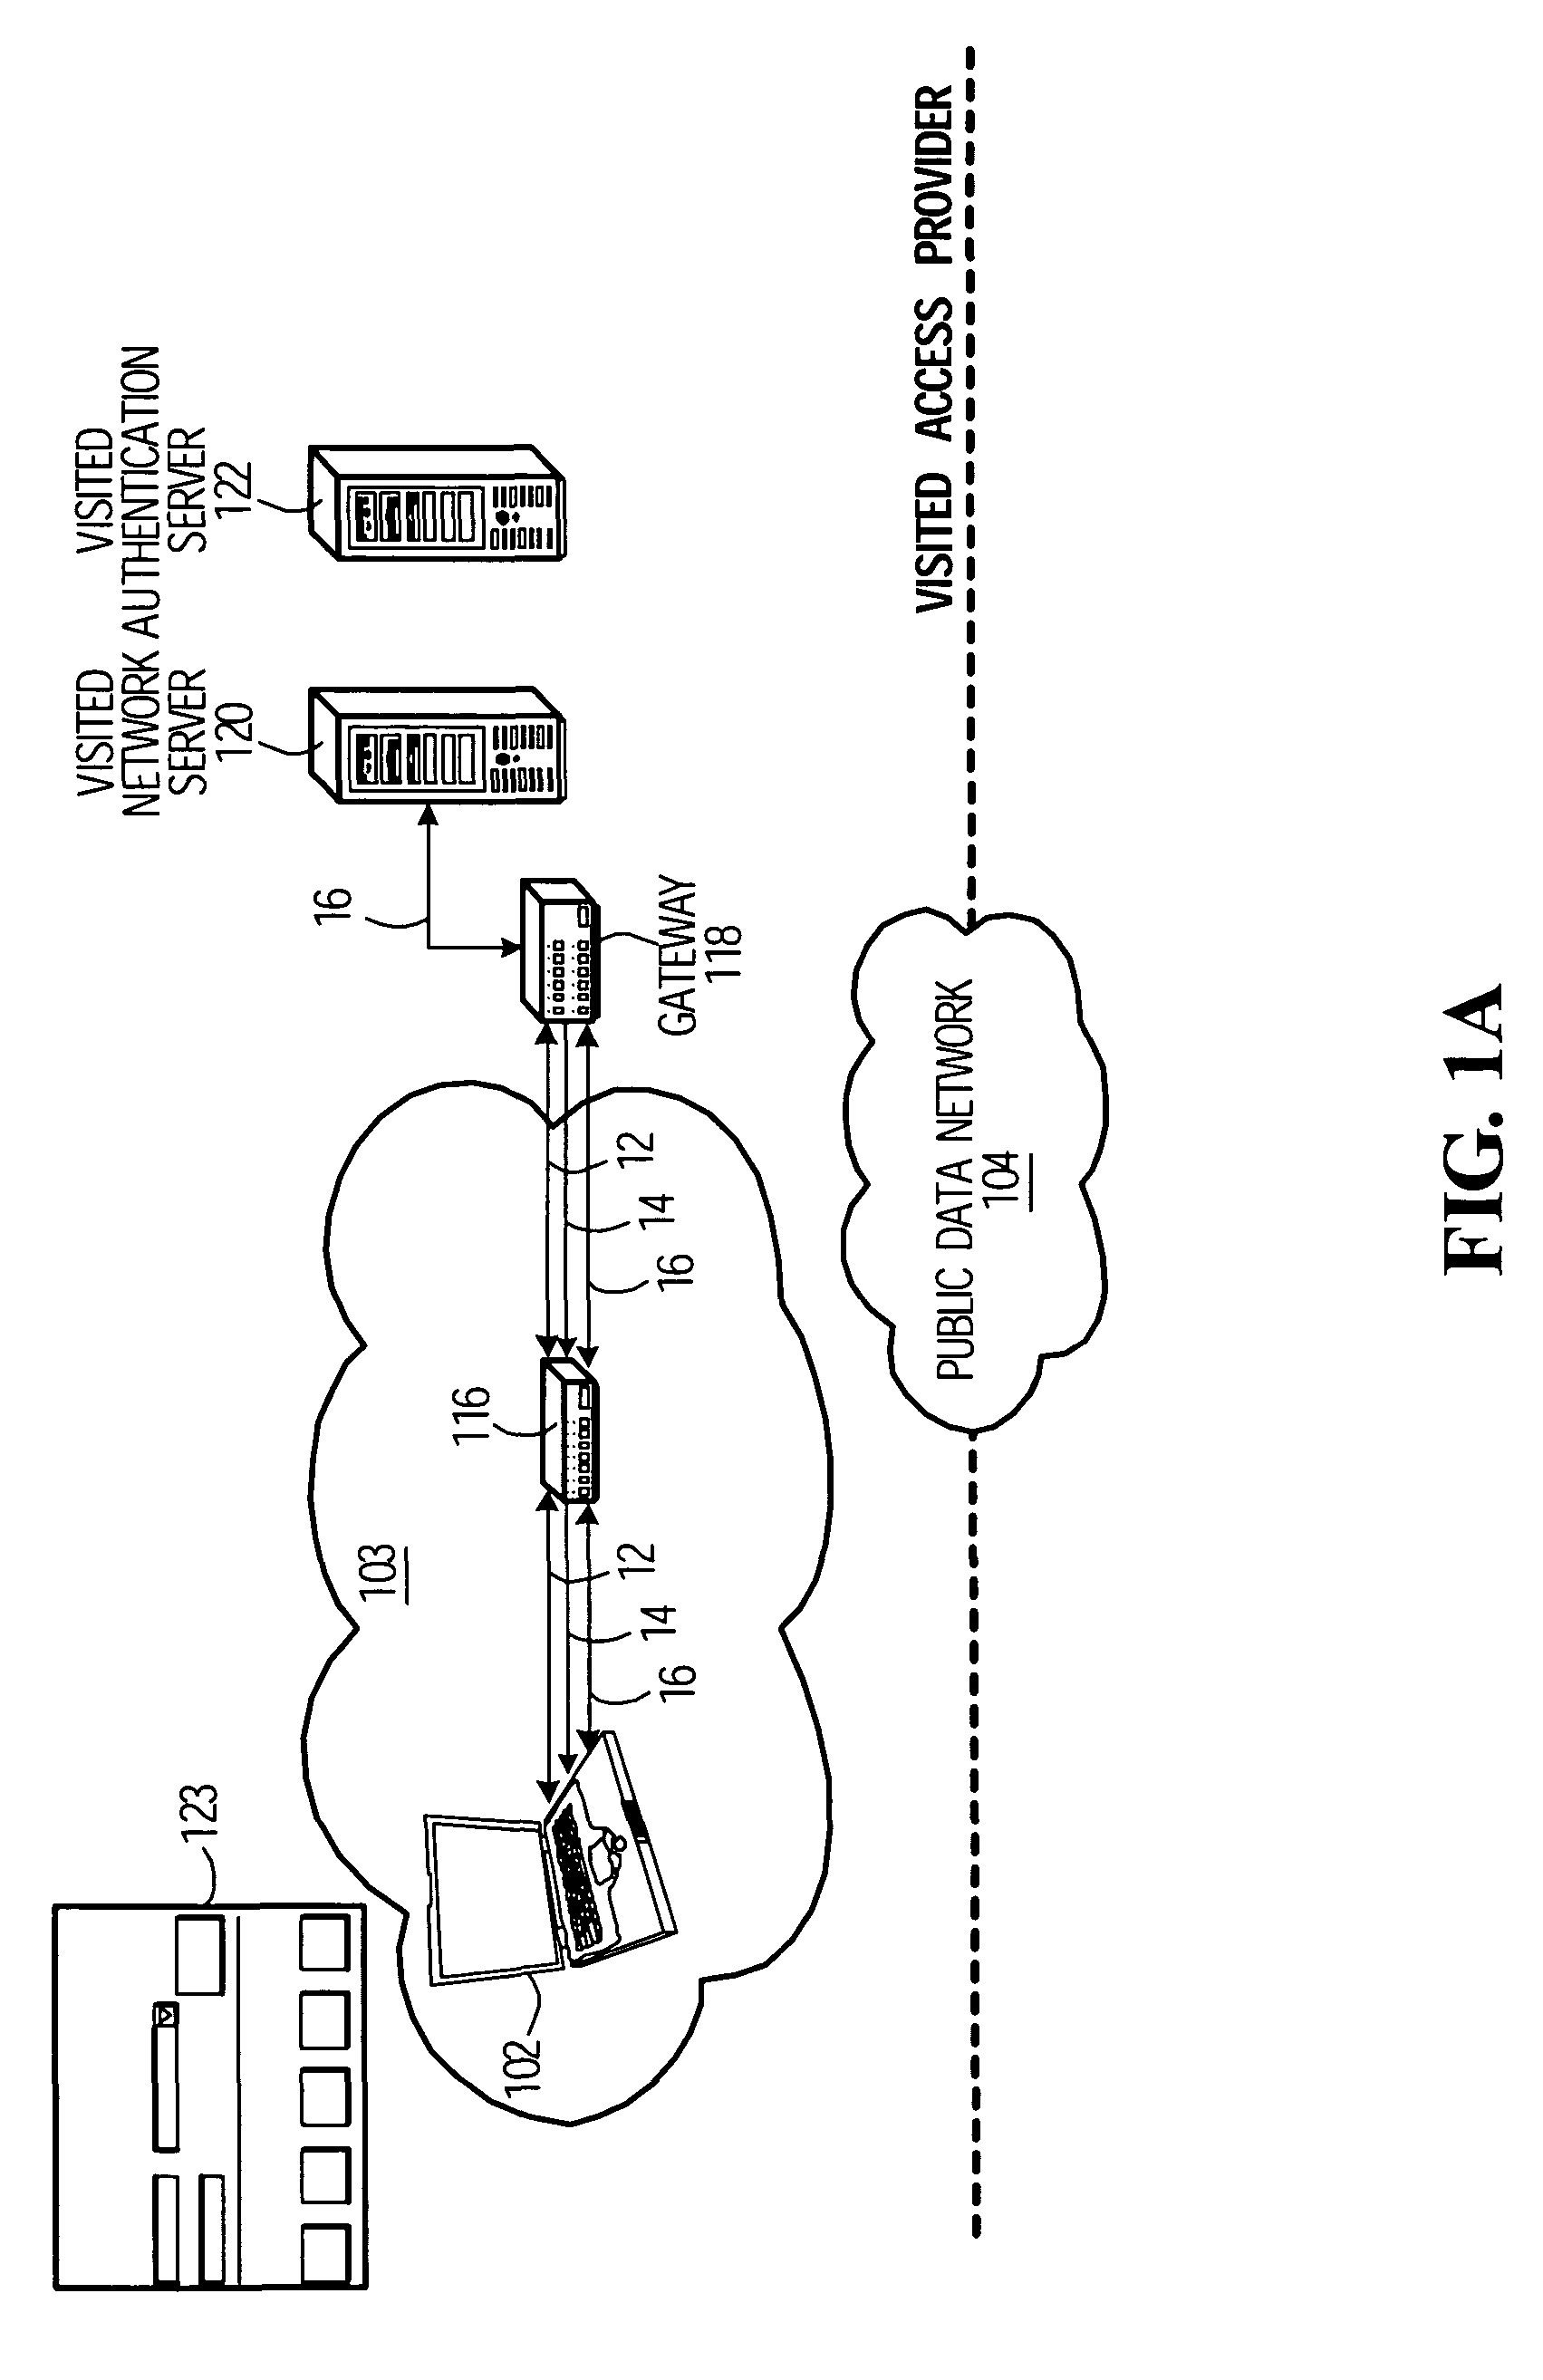 Systems and methods for controlling access to a public data network from a visited access provider